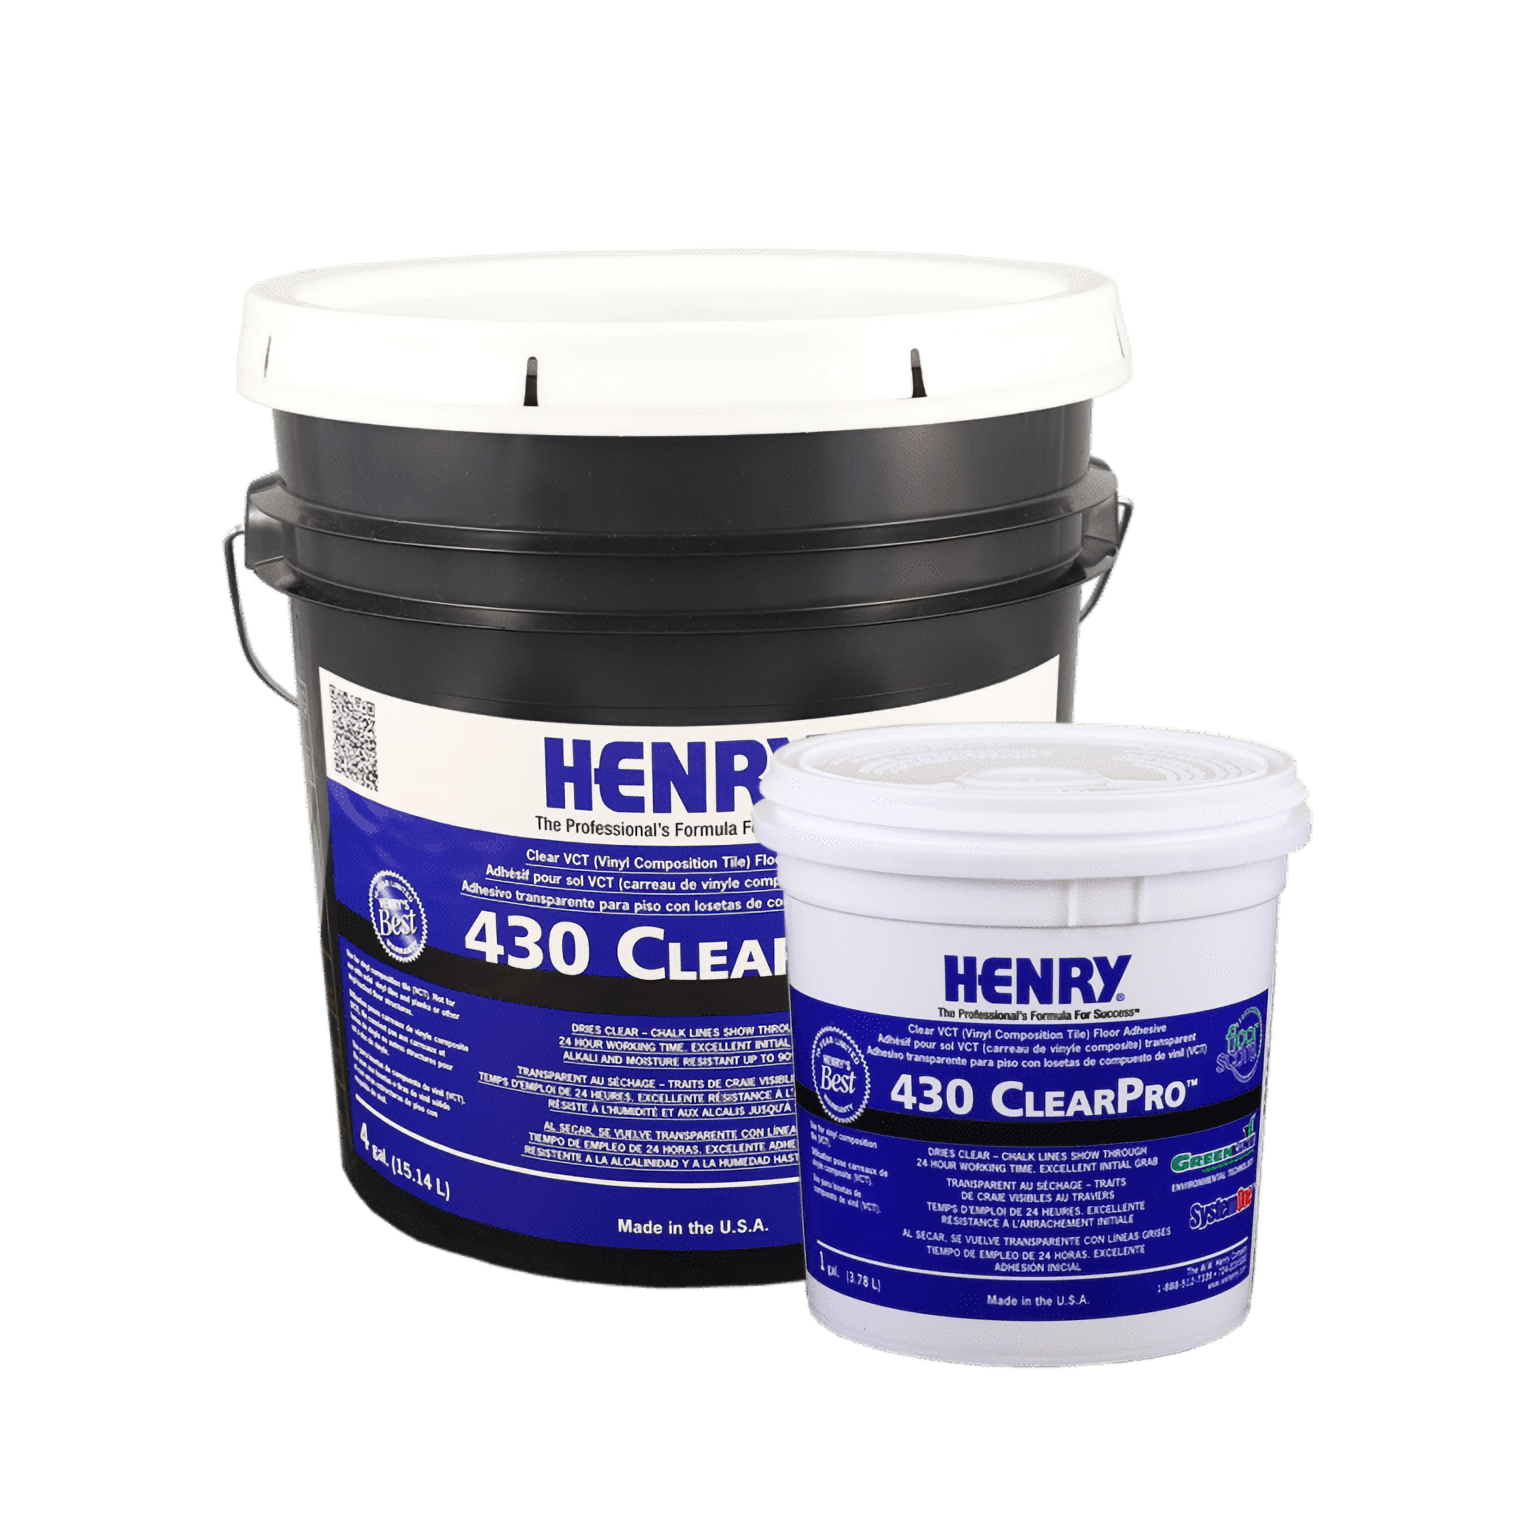 HENRY 430 CLEAR PRO